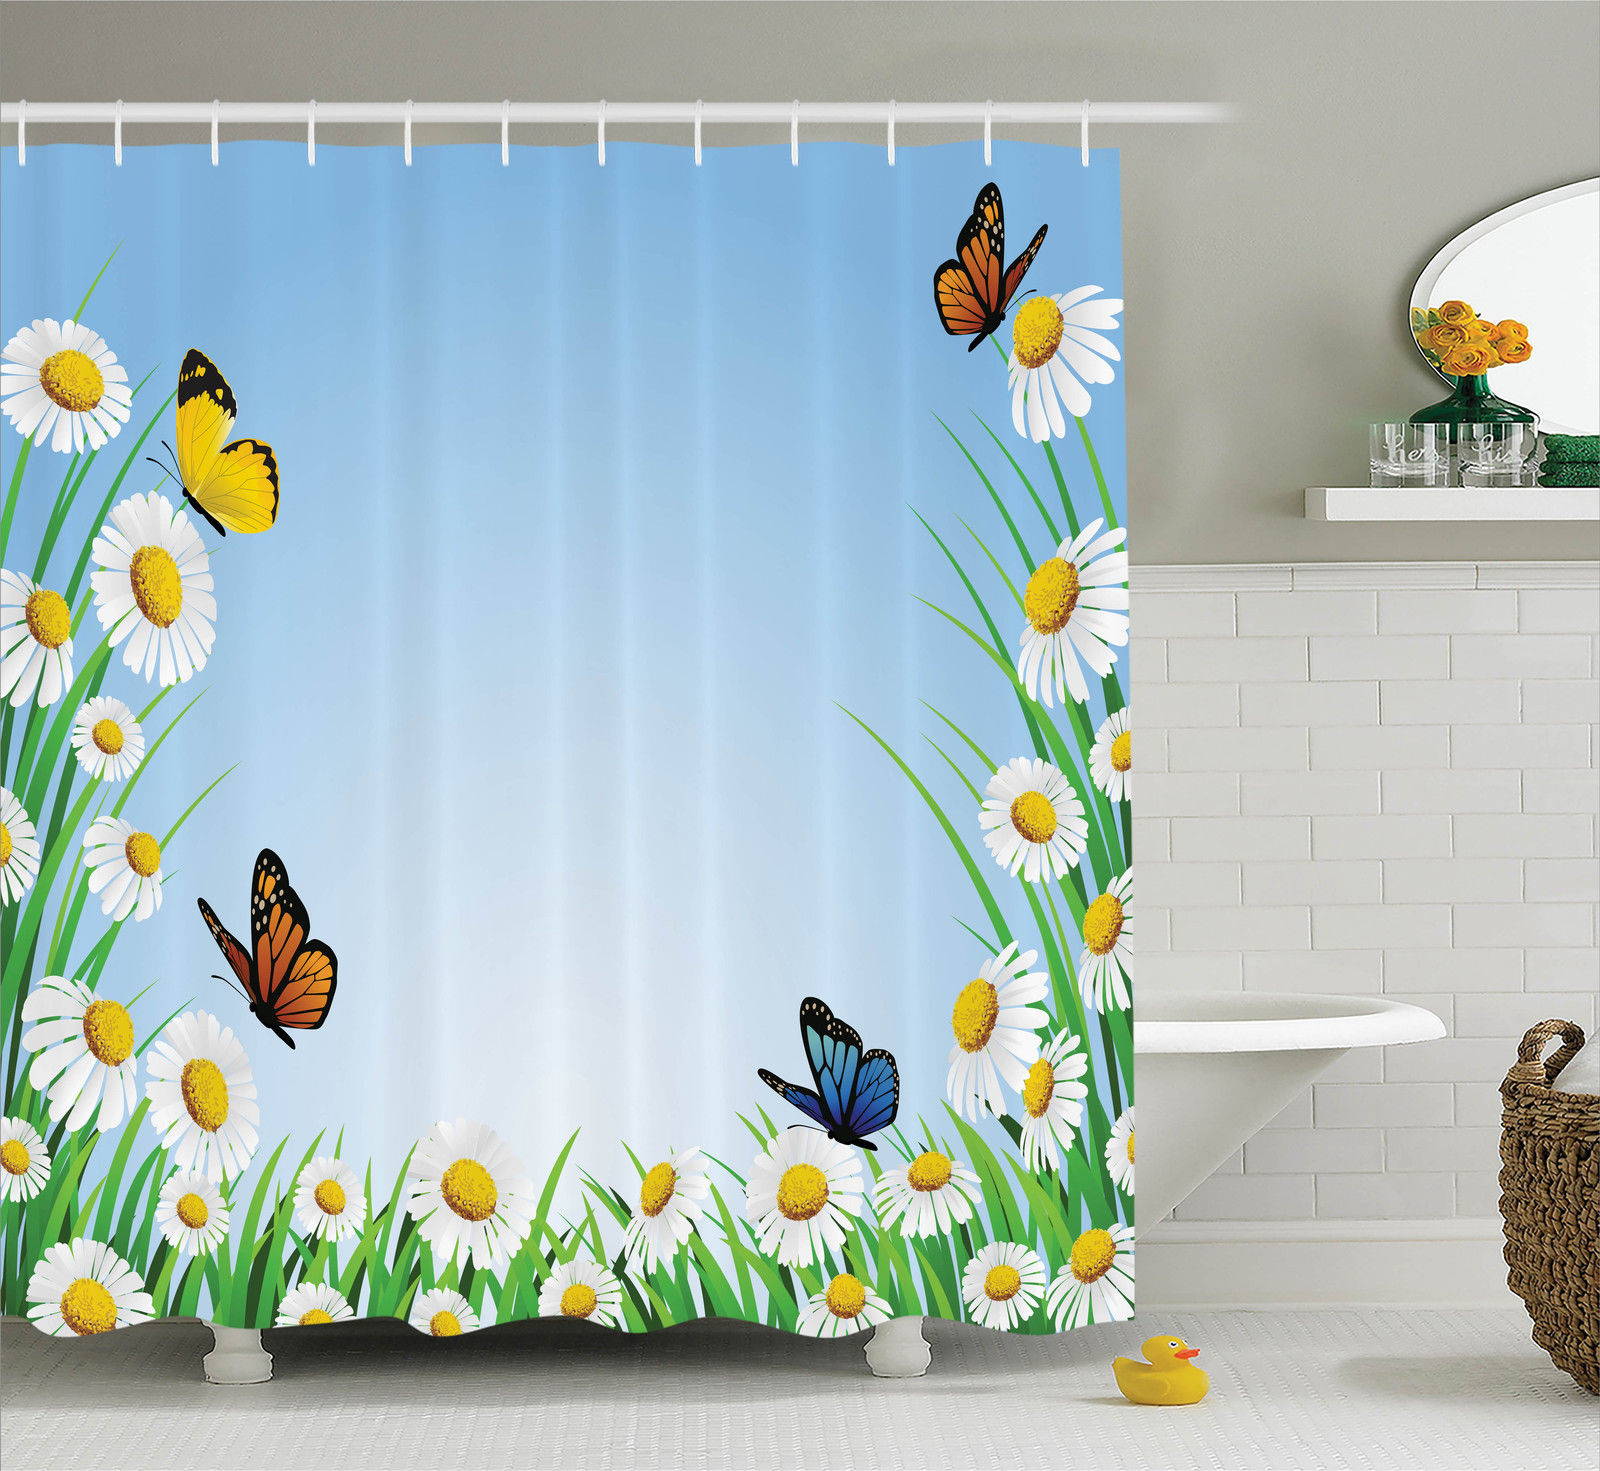 Shower Curtain Set, Daisies With Butterflies